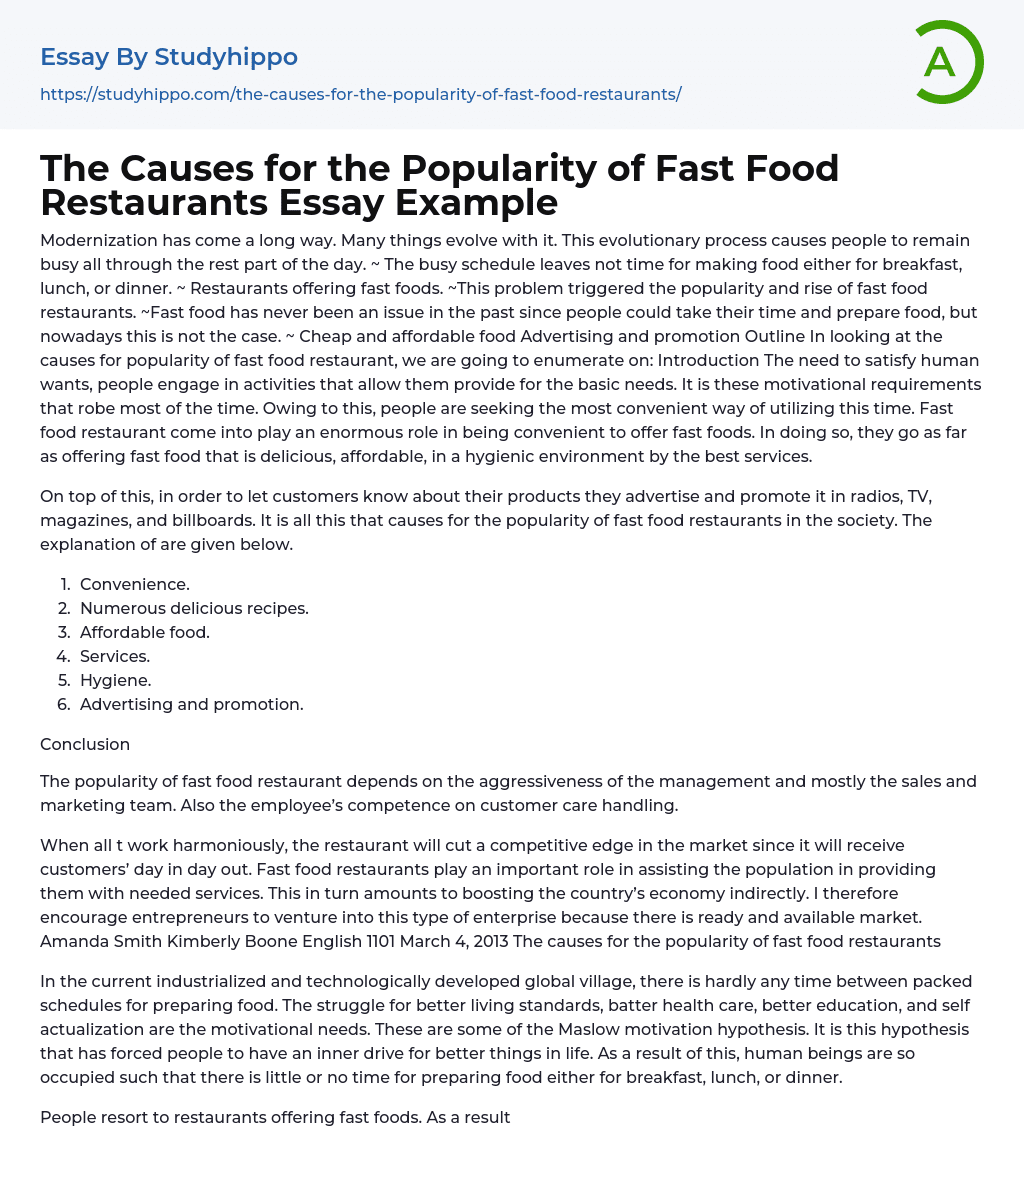 The Causes for the Popularity of Fast Food Restaurants Essay Example